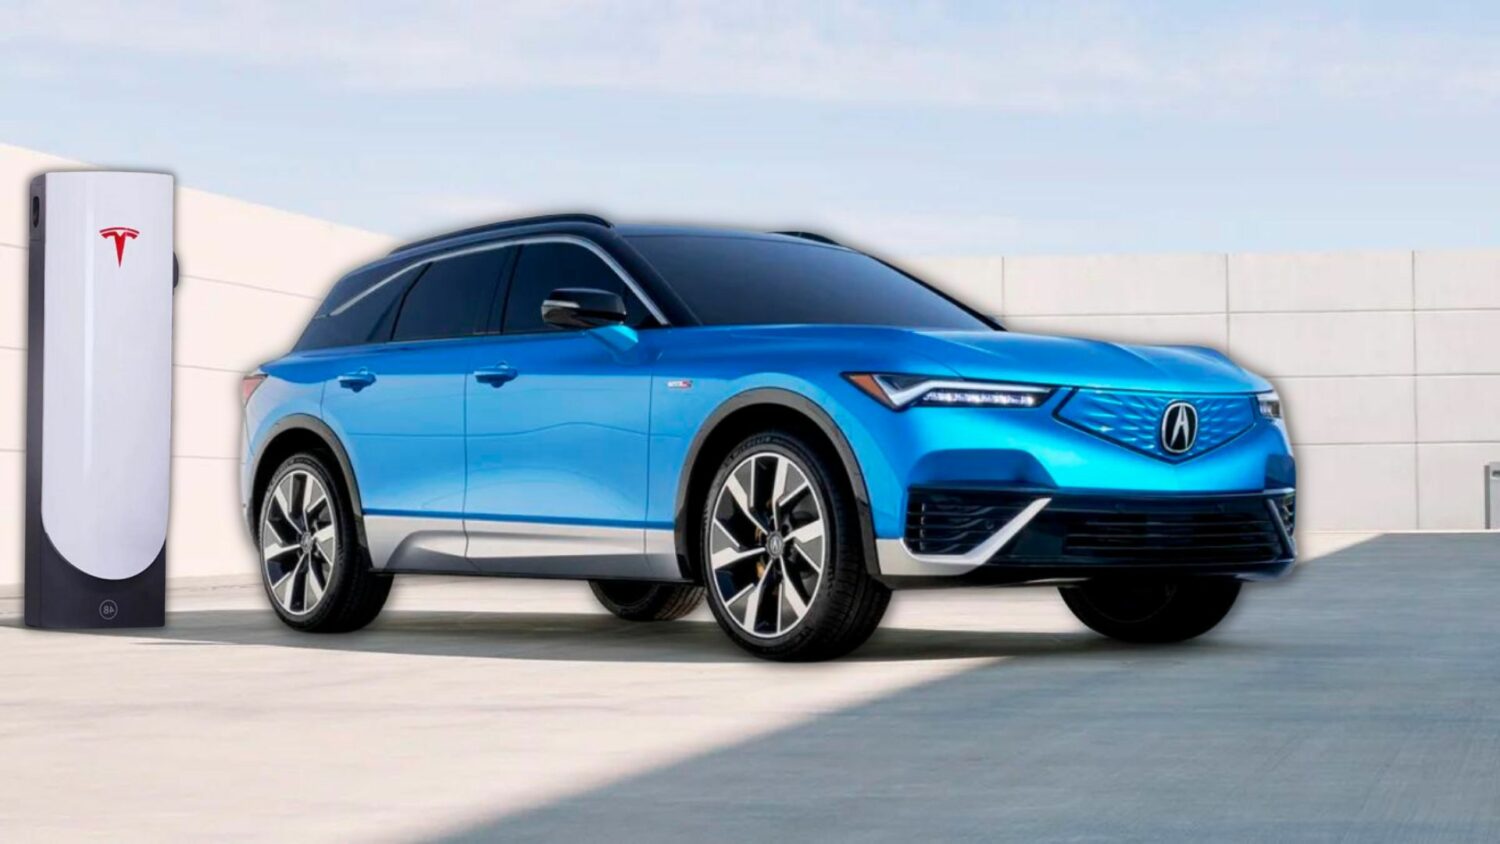 Honda confirmed that it would use the Tesla-designed NACS connector in its electric vehicles in North America.